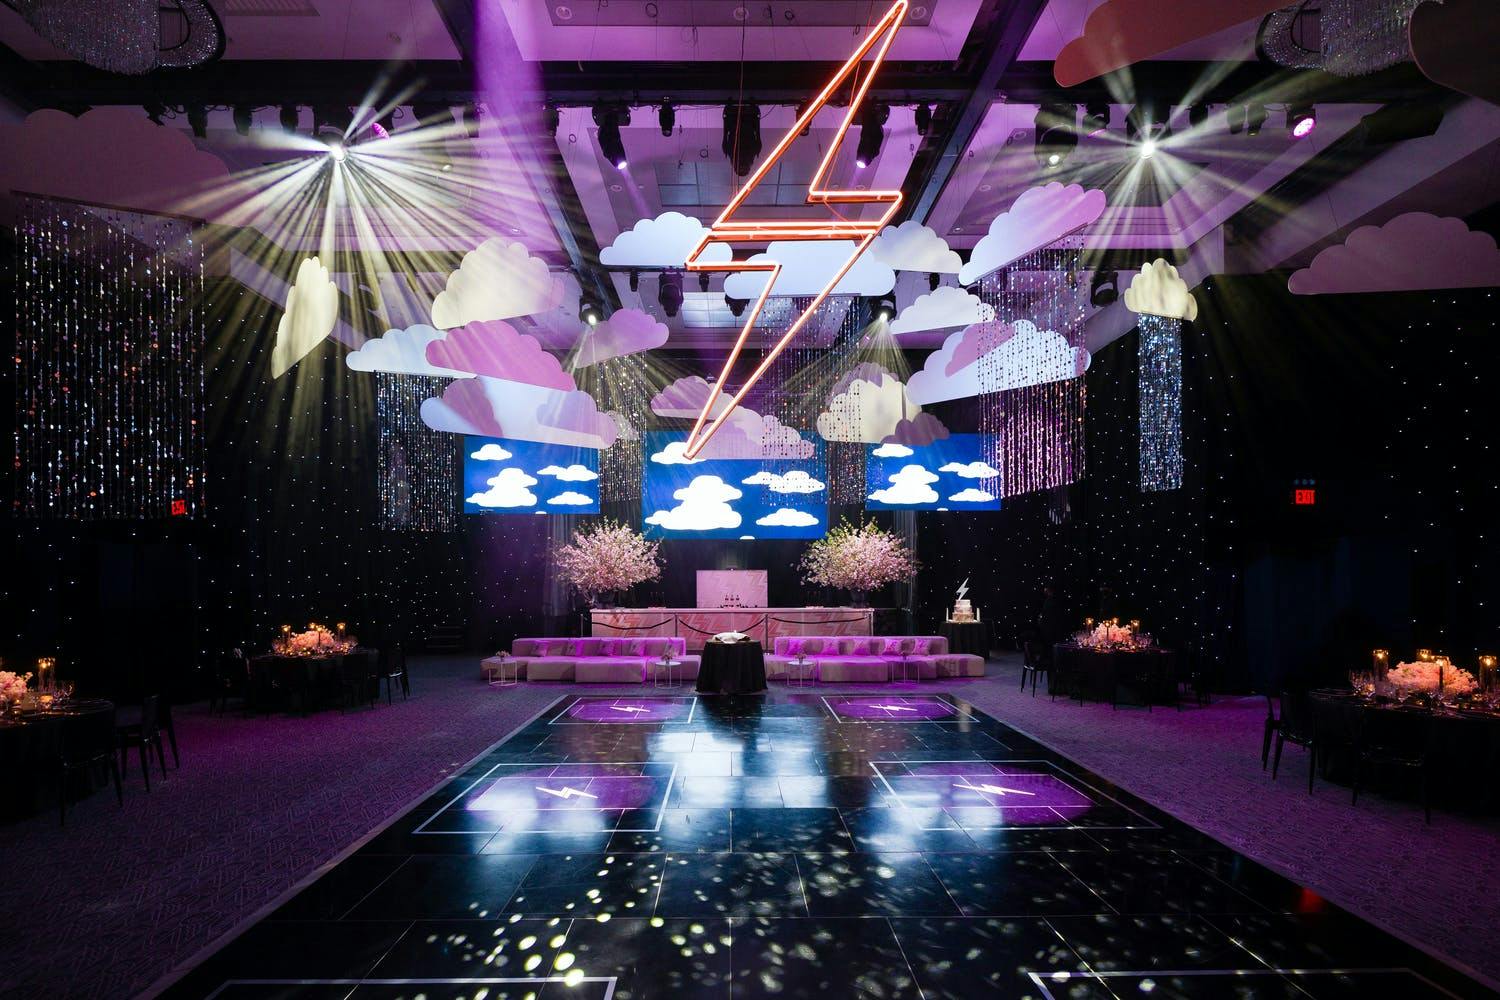 Lightning Bat Mitzvah Theme Party with Lightning Bolt and Clouds Suspended Over Dance Floor | PartySlate